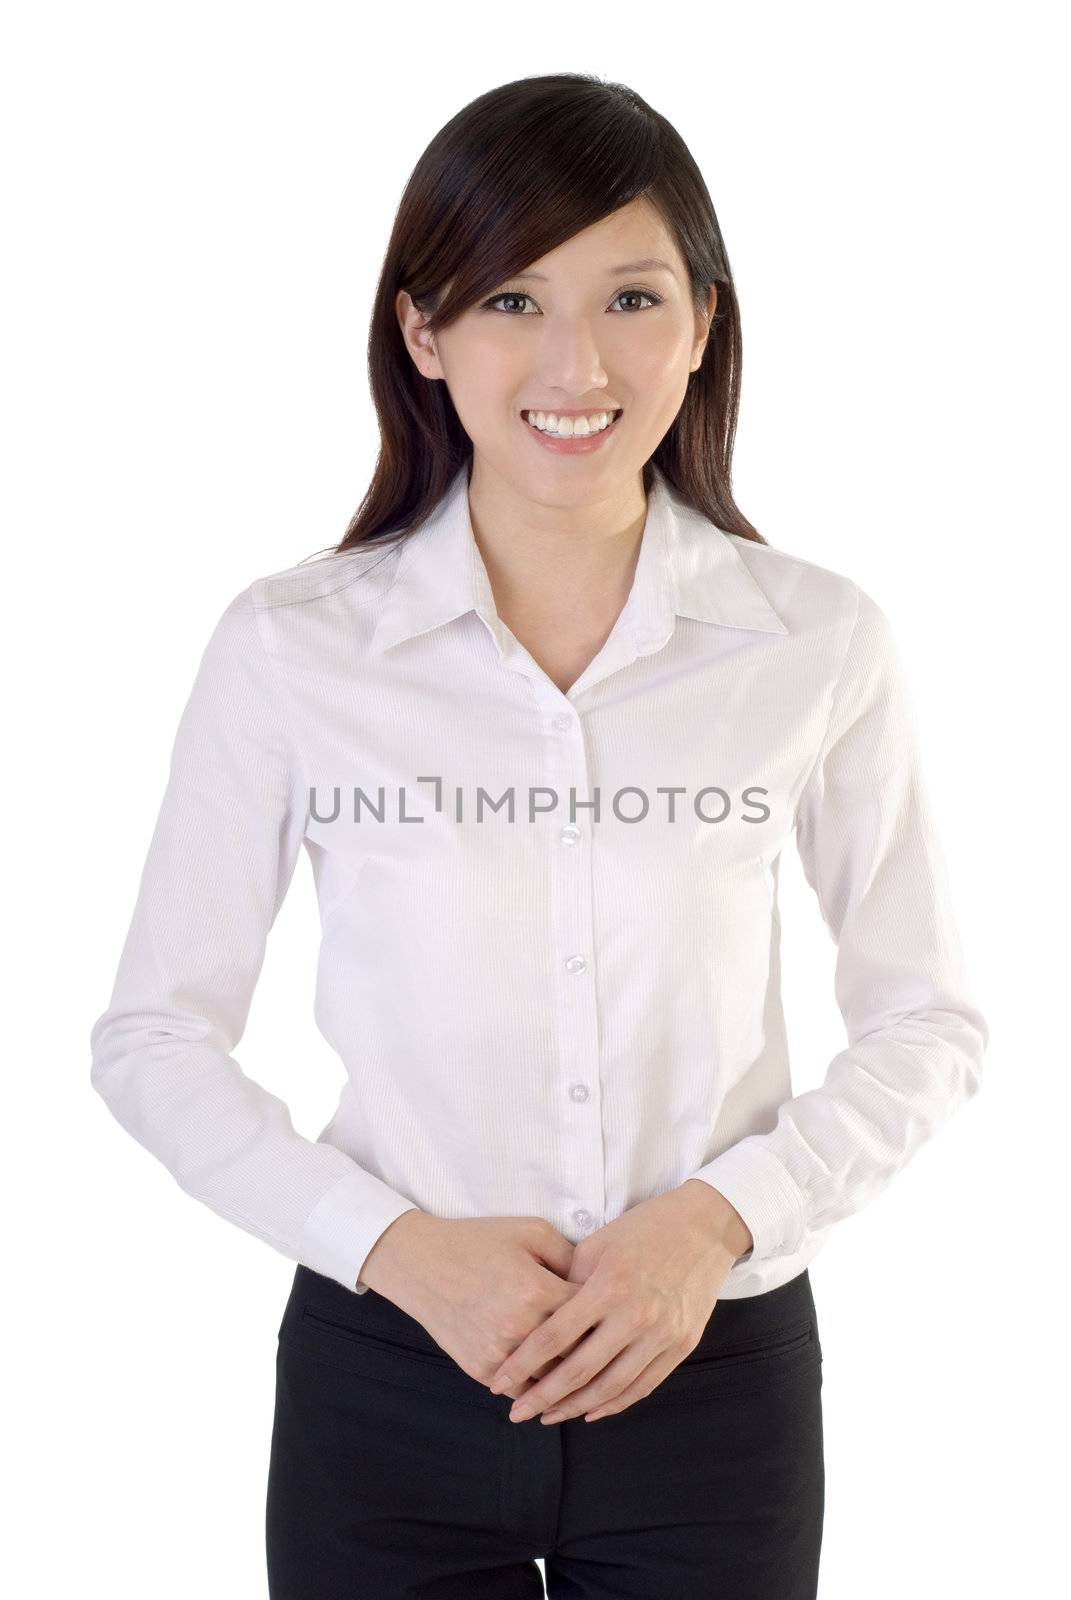 Friendly young business woman portrait on white background.